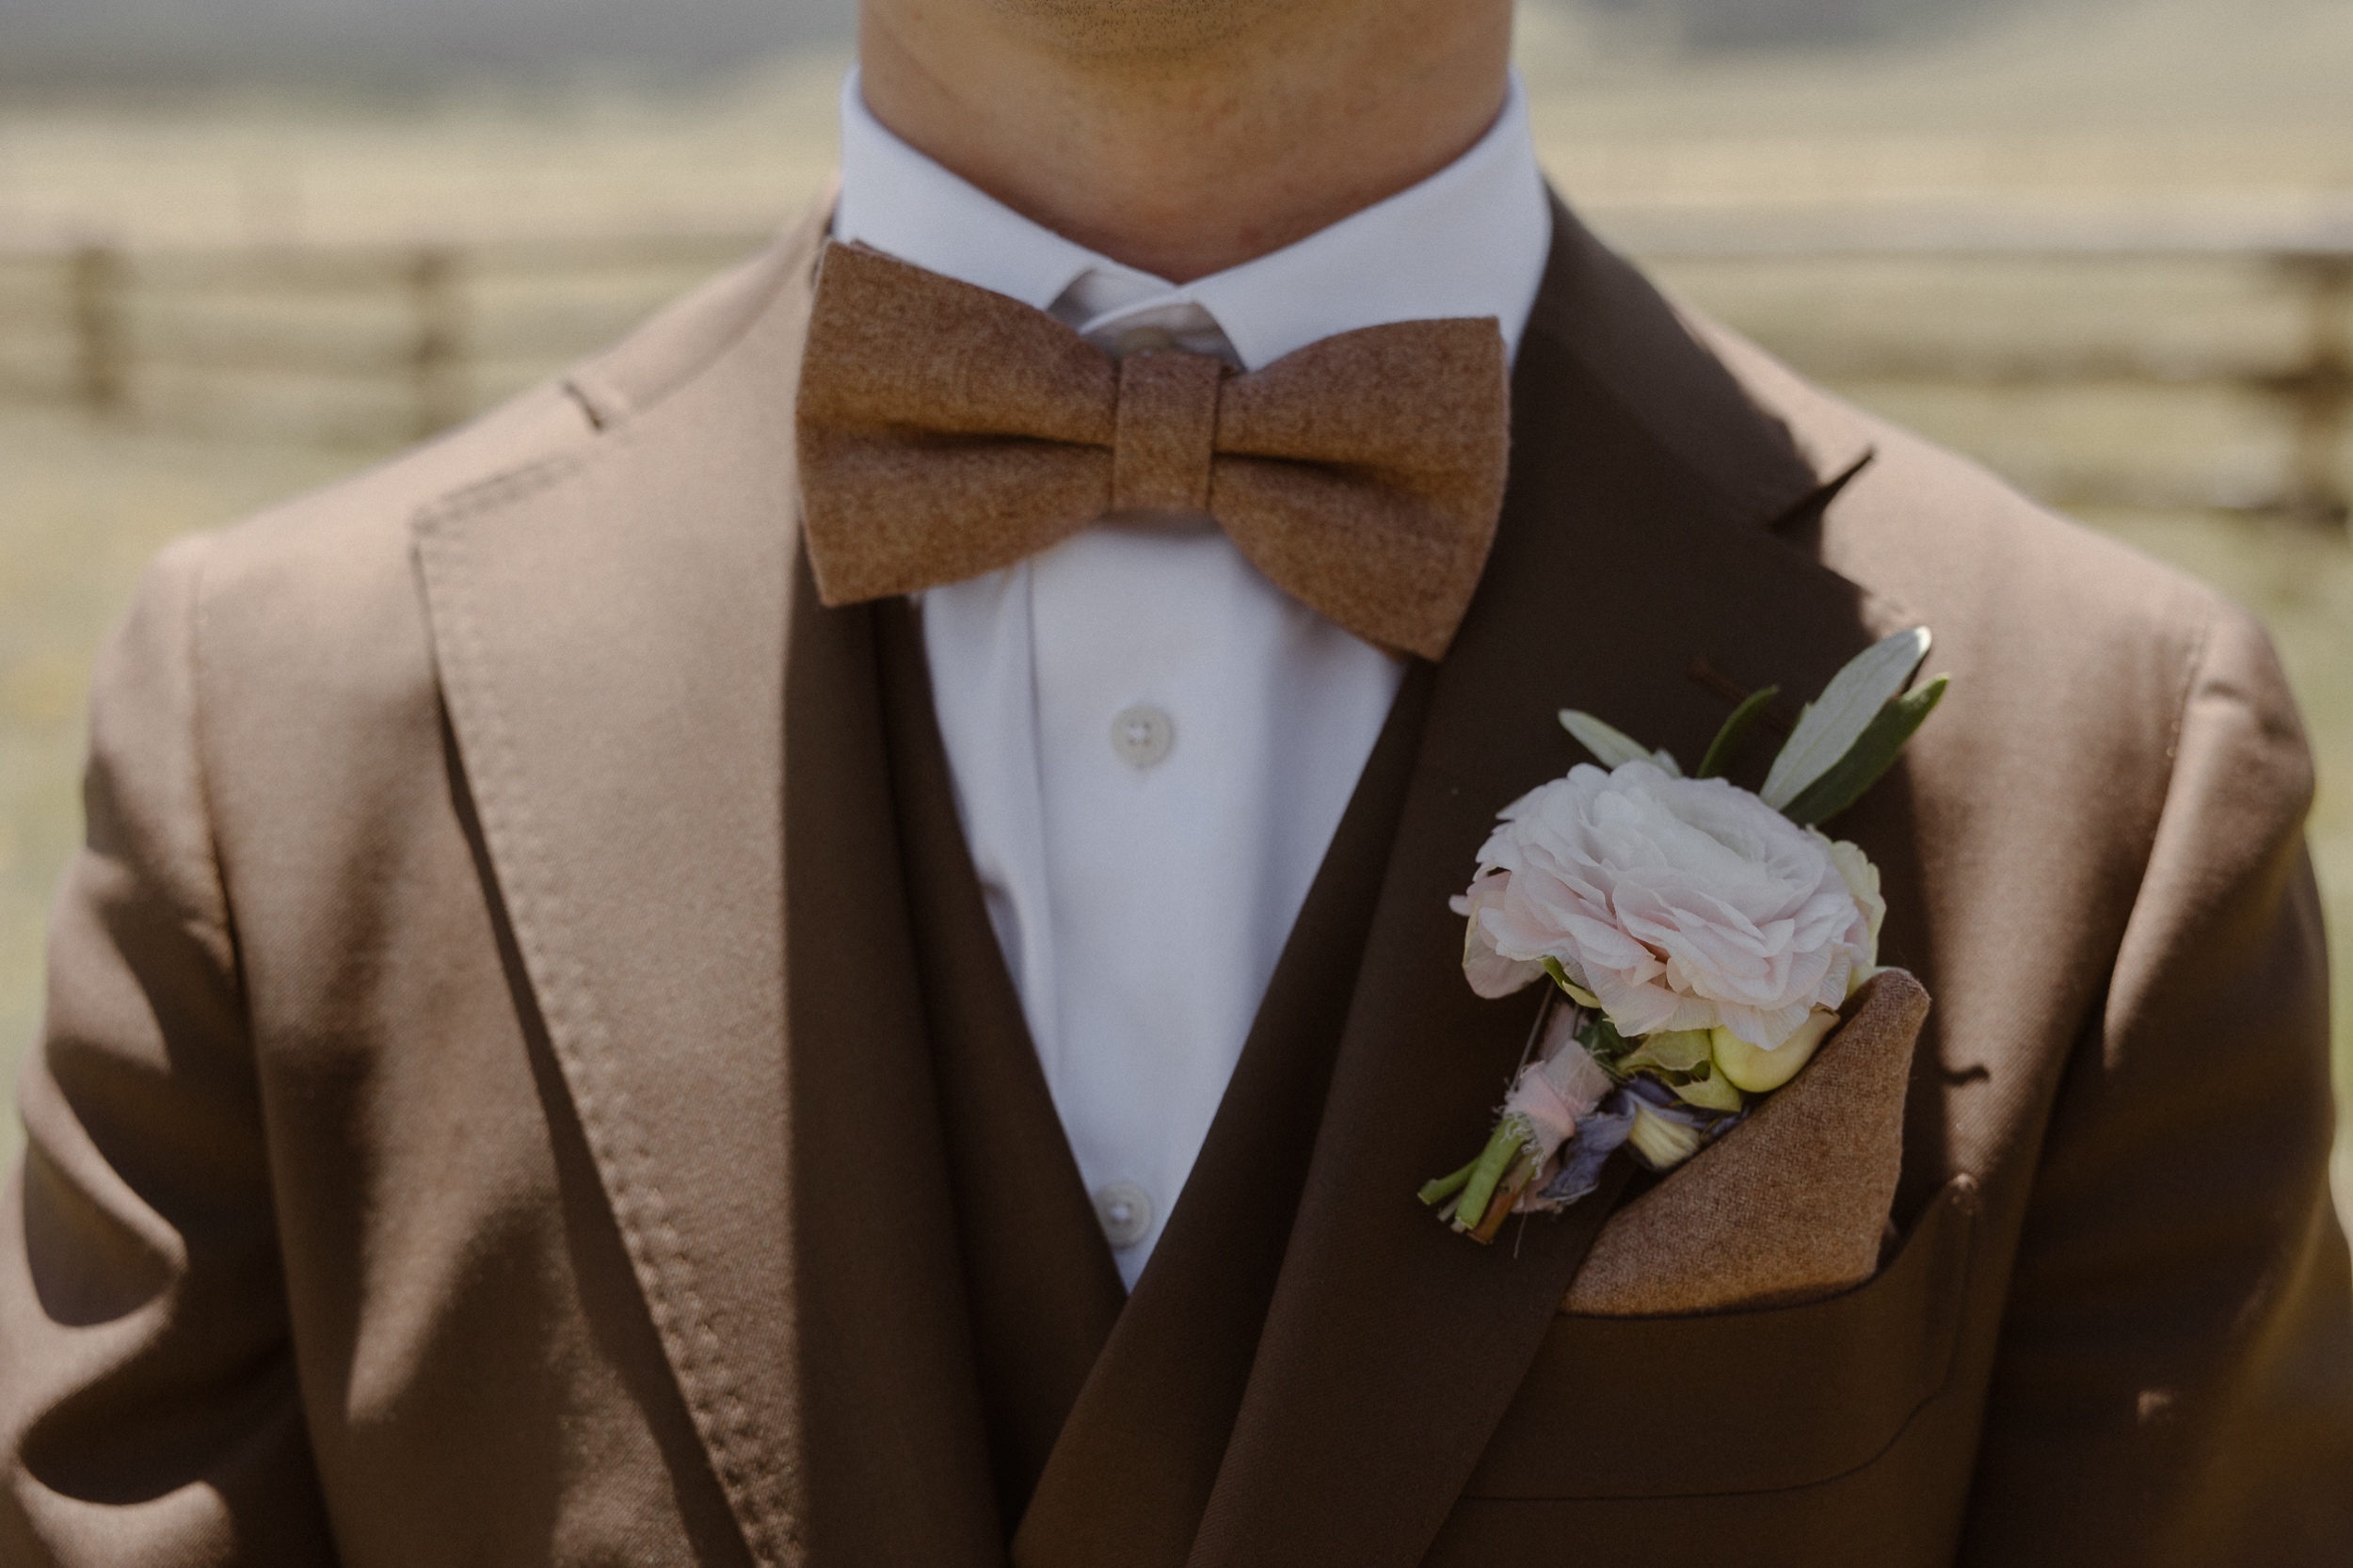 A closeup of a groom's bowtie and boutonniere. Photo by Colorado wedding photographer Ashley Joyce.